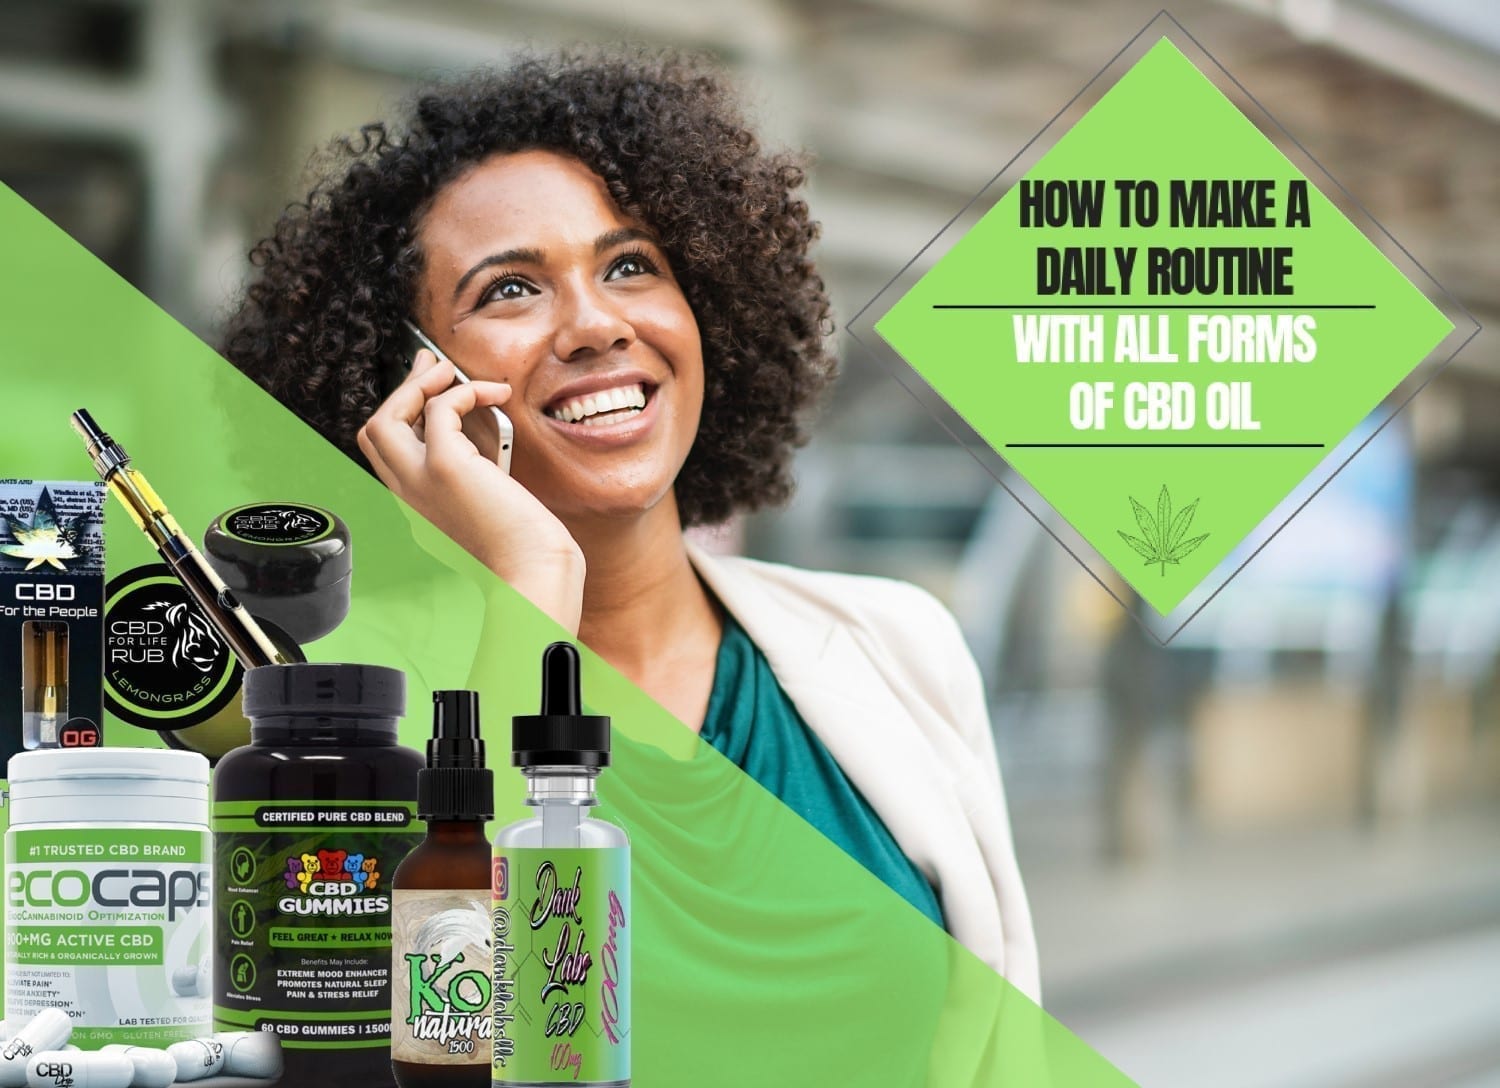 How to make a daily routine with all forms of CBD oil